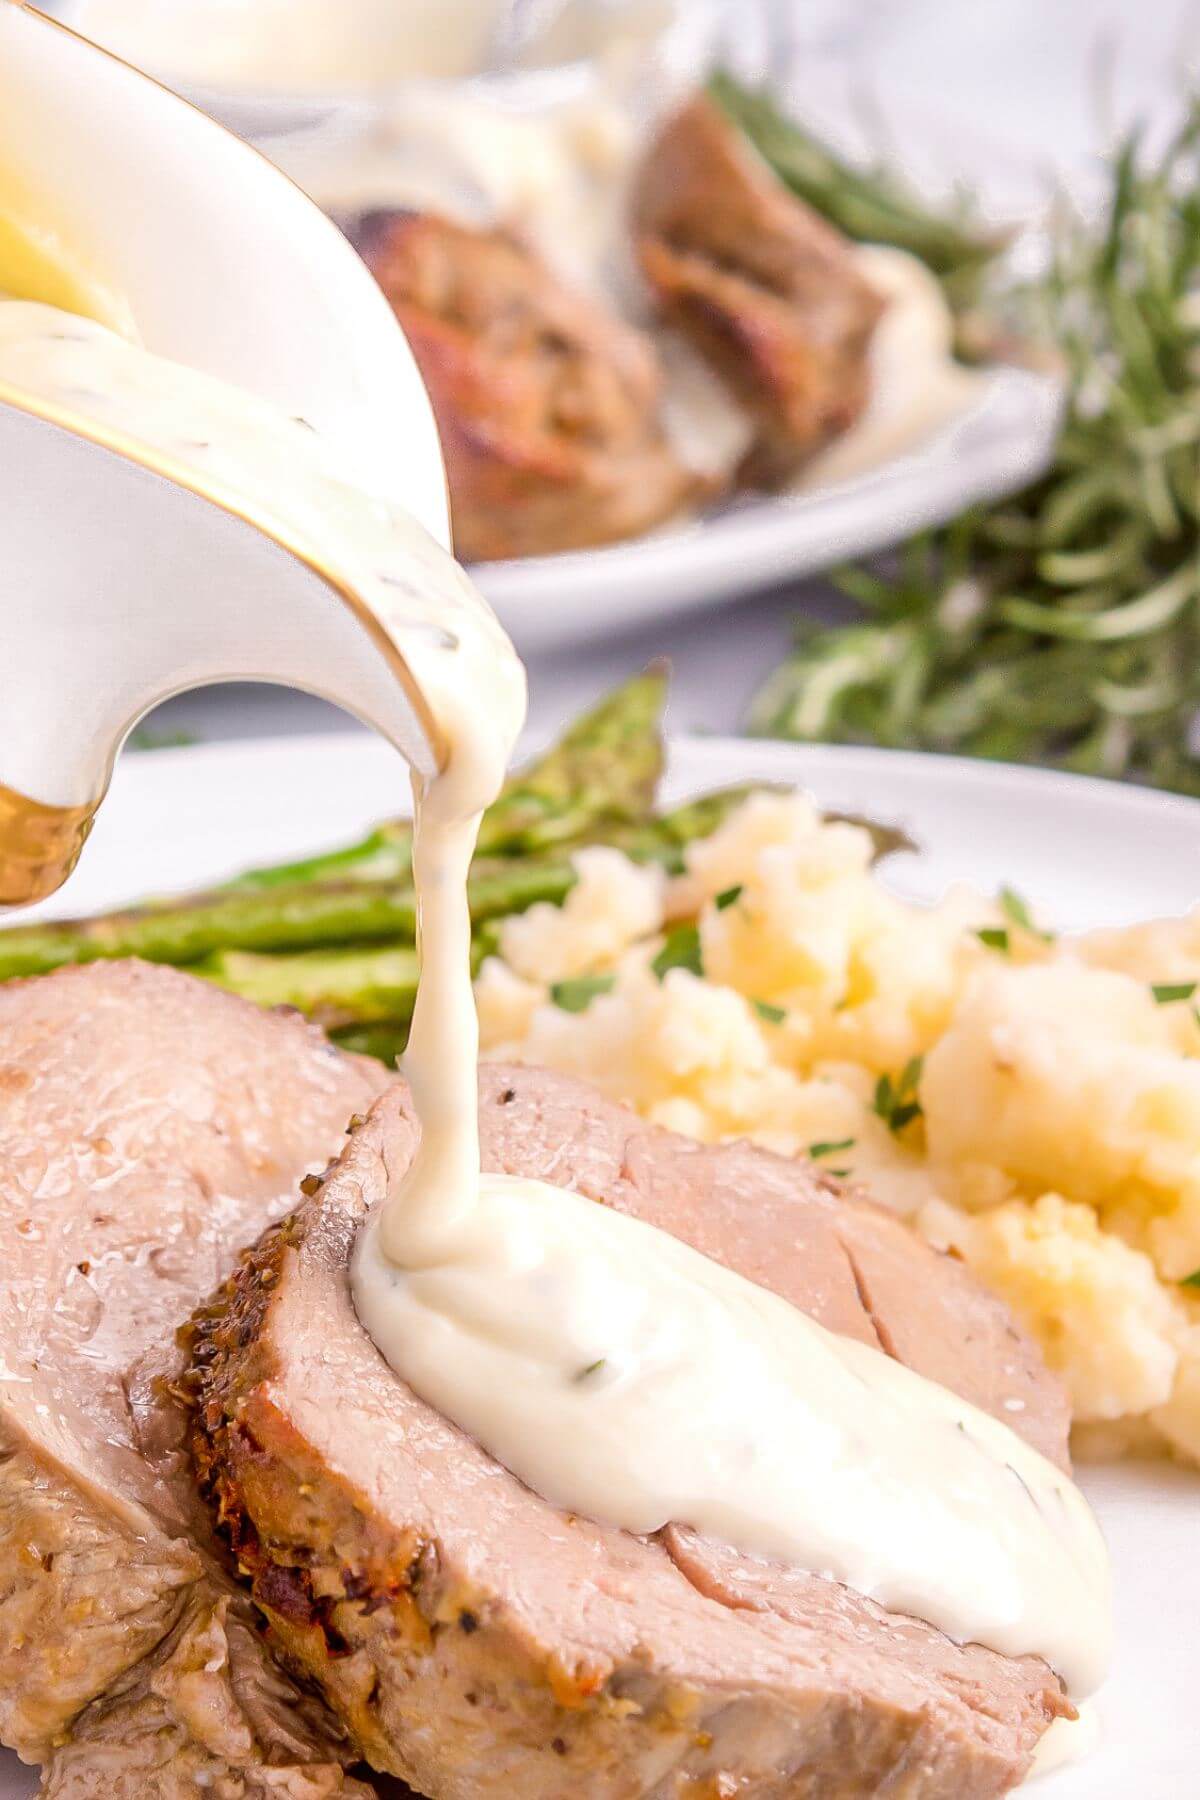 A sauce serving holder pours white sauce onto meat dish next to mashed potatoes and asparagus.